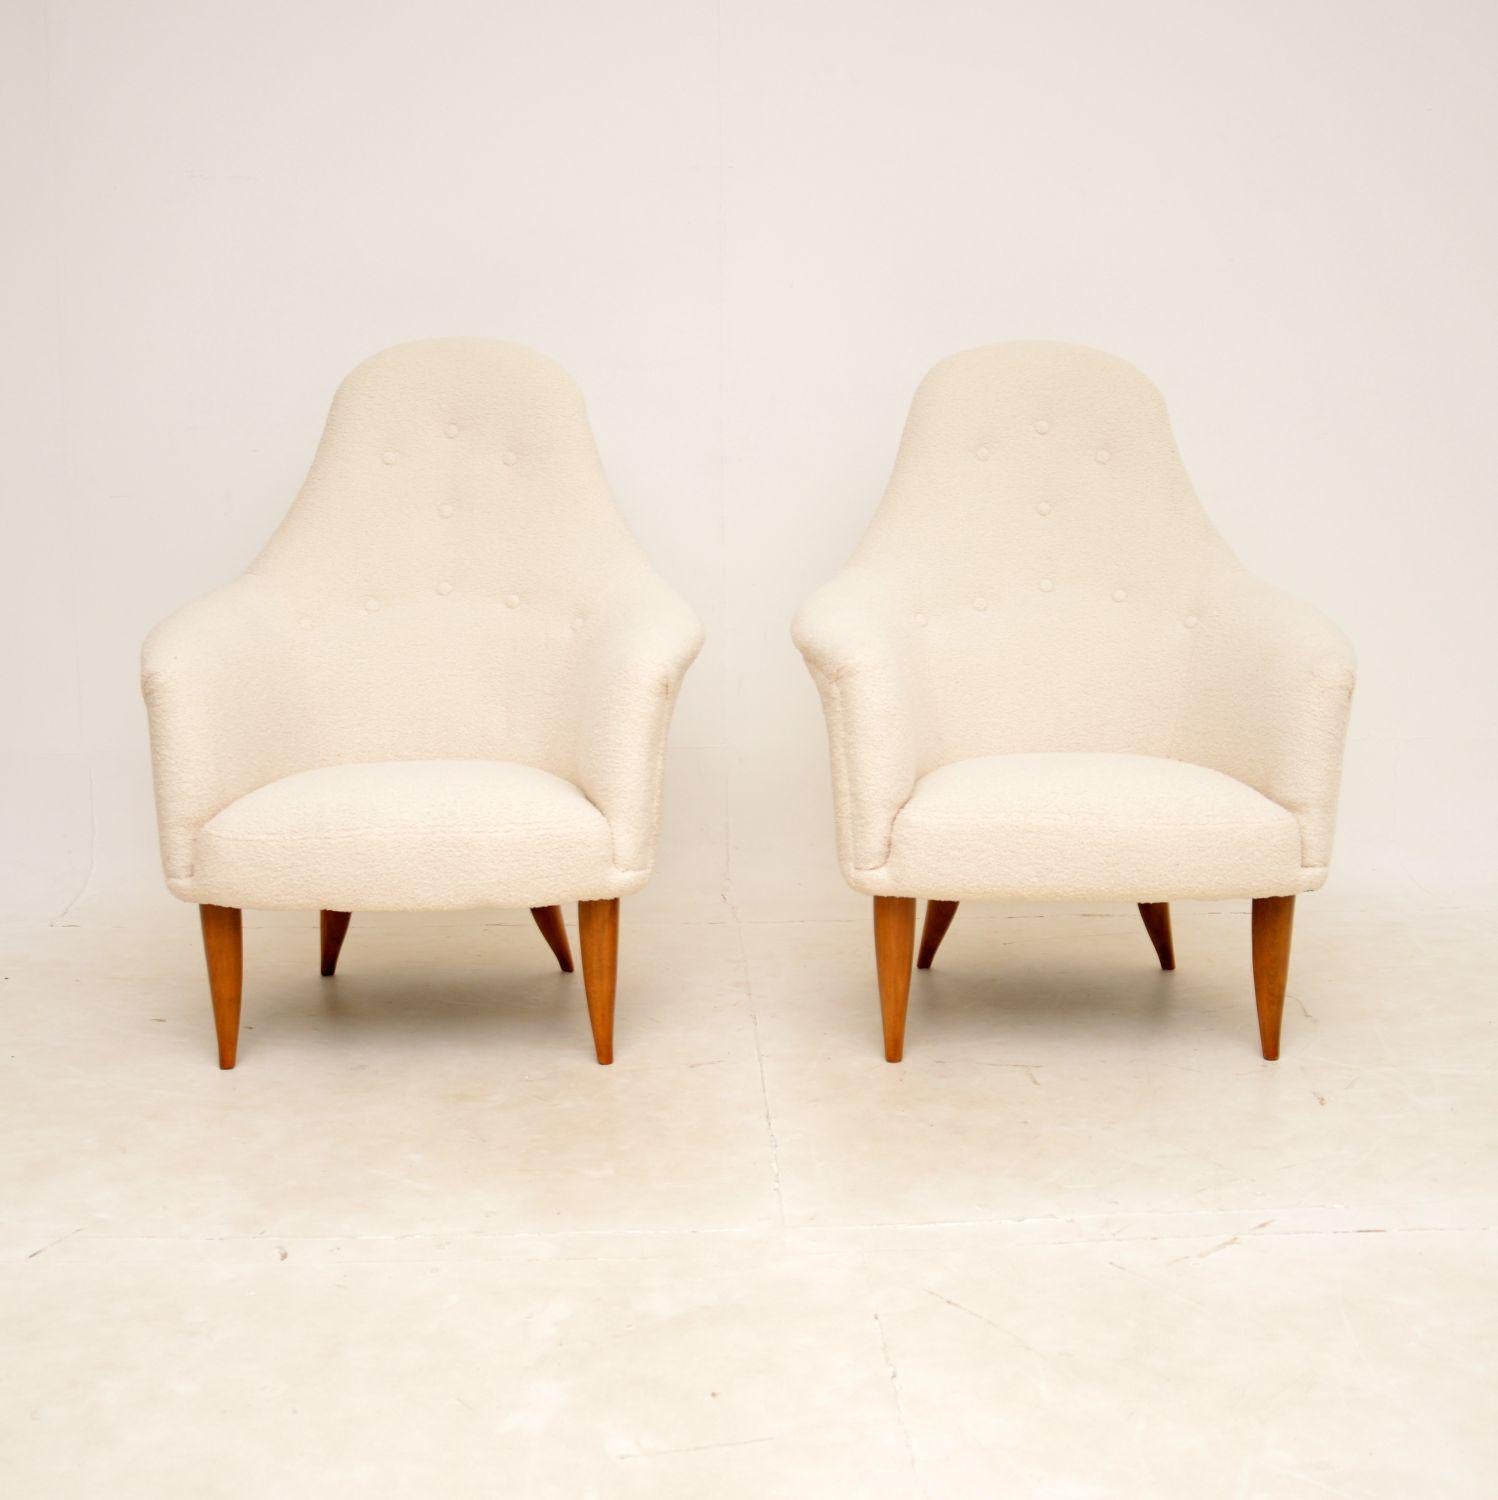 An absolutely stunning and very rare pair of vintage Swedish armchairs. This model is called the ‘Adam’ chair, designed by Kerstin Horlin Holmquist for Nordiska Kompaniet. They were recently imported from Sweden, they date from the 1960’s.

The